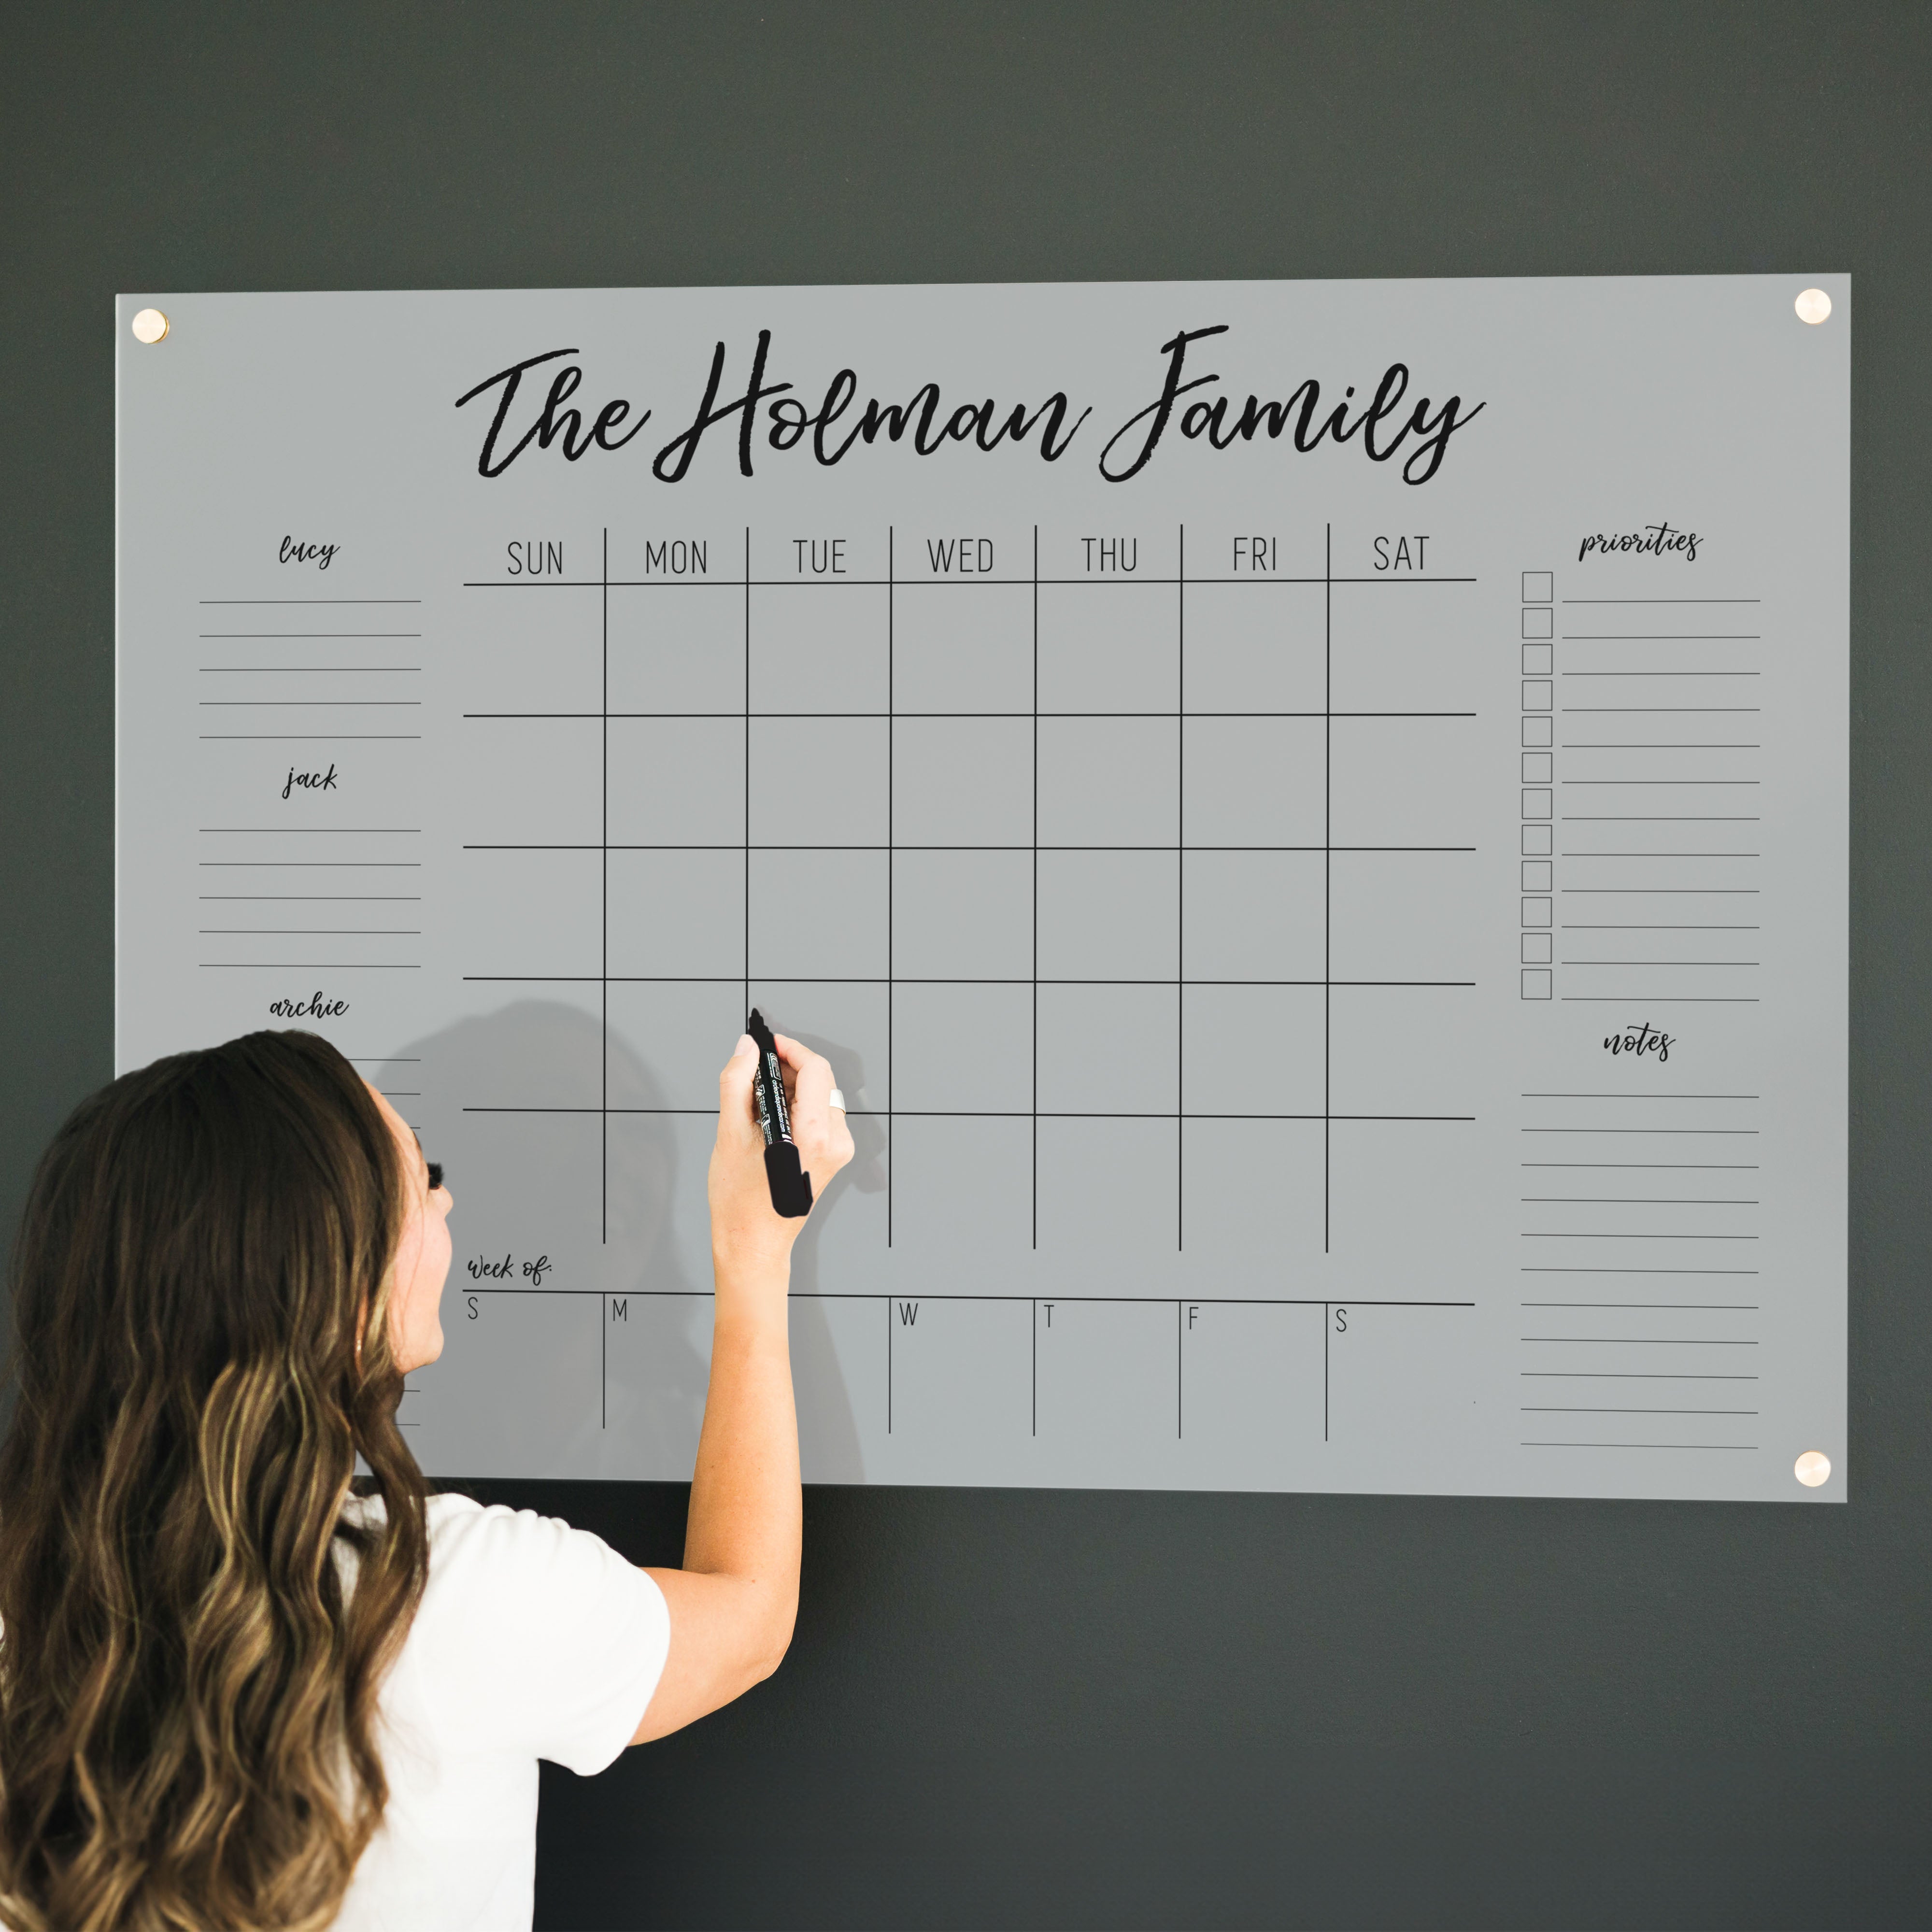 A Dry-erase calendar with a monthly and weekly format made of acrylic hanging on the wall